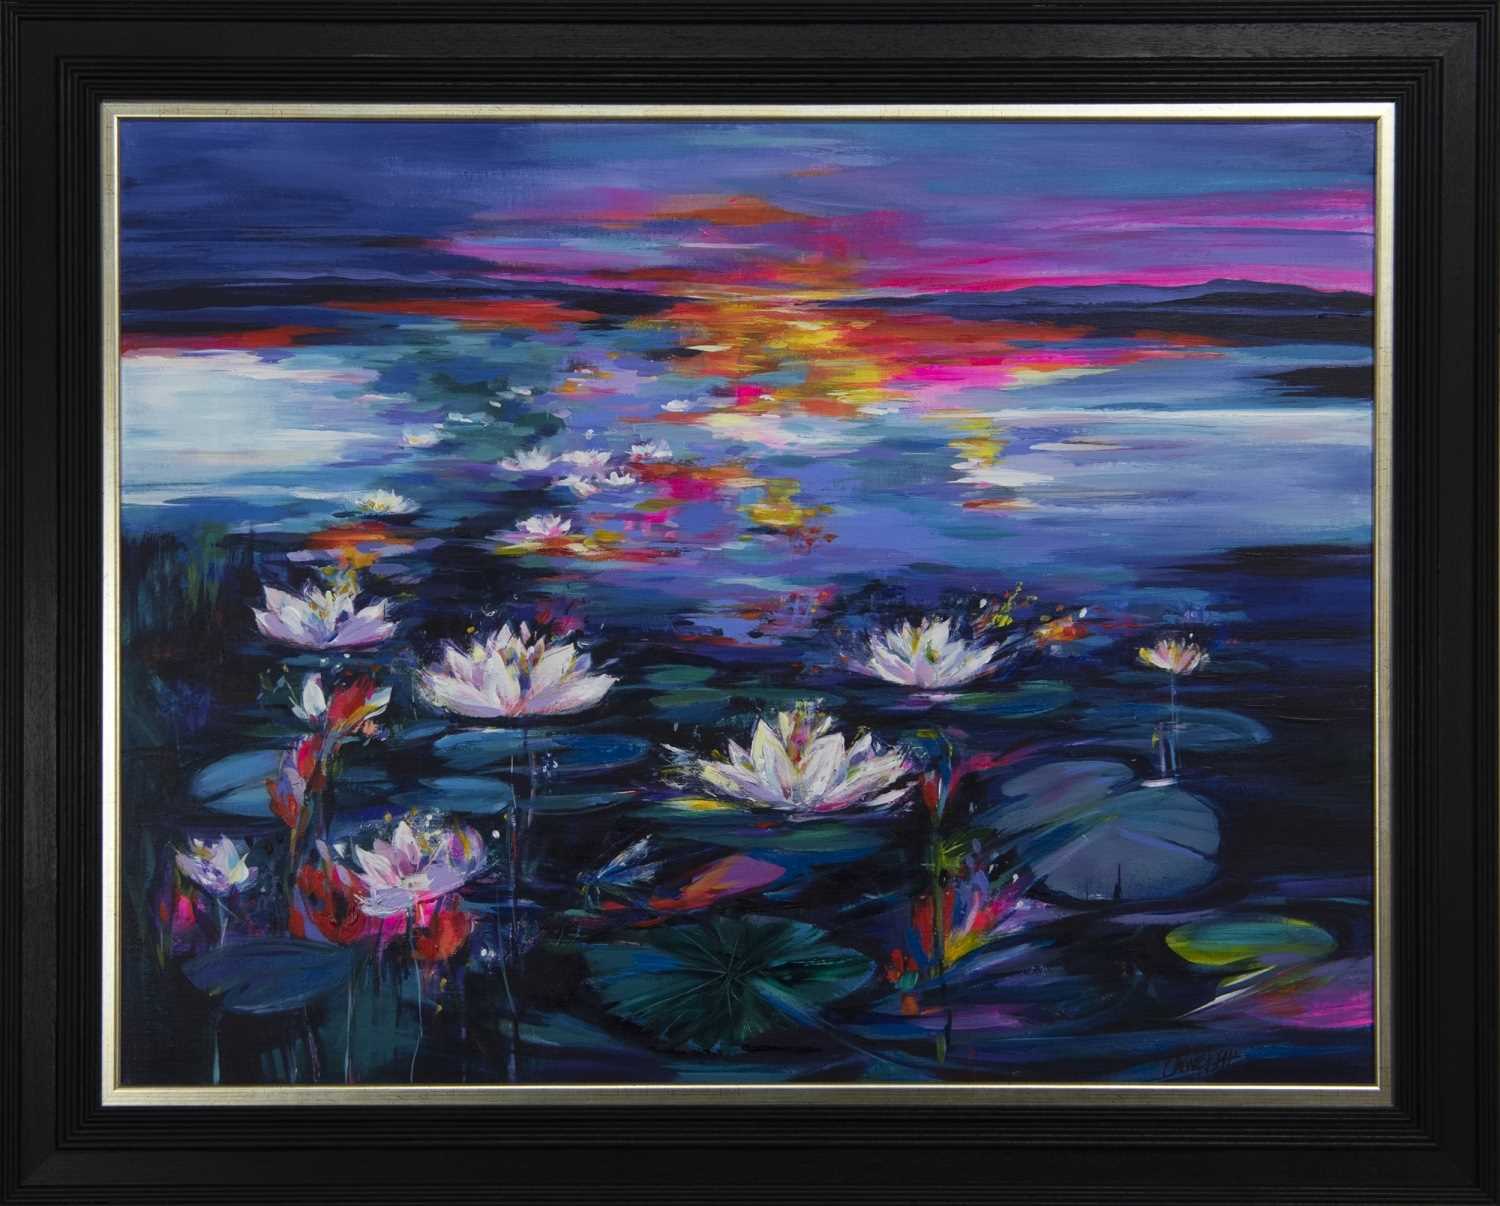 Lot 636 - WATERLILIES NEAR LOCHINVER, AN ACRYLIC BY SHELAGH CAMPBELL